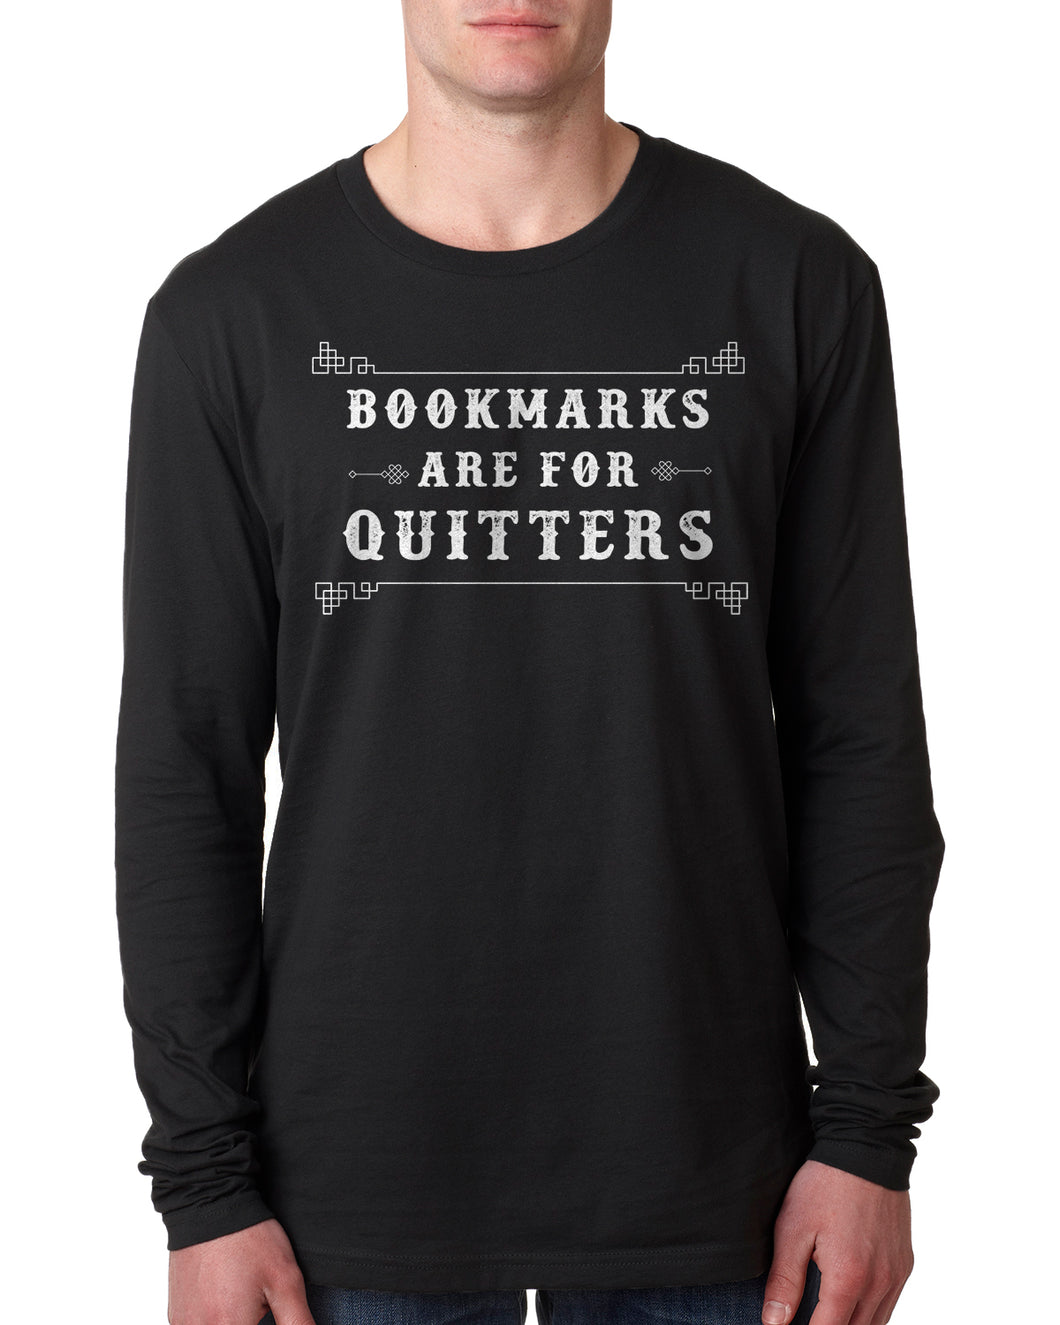 Bookmarks are for Quiiters Funny Bookworm Long Sleeve Men's Shirt